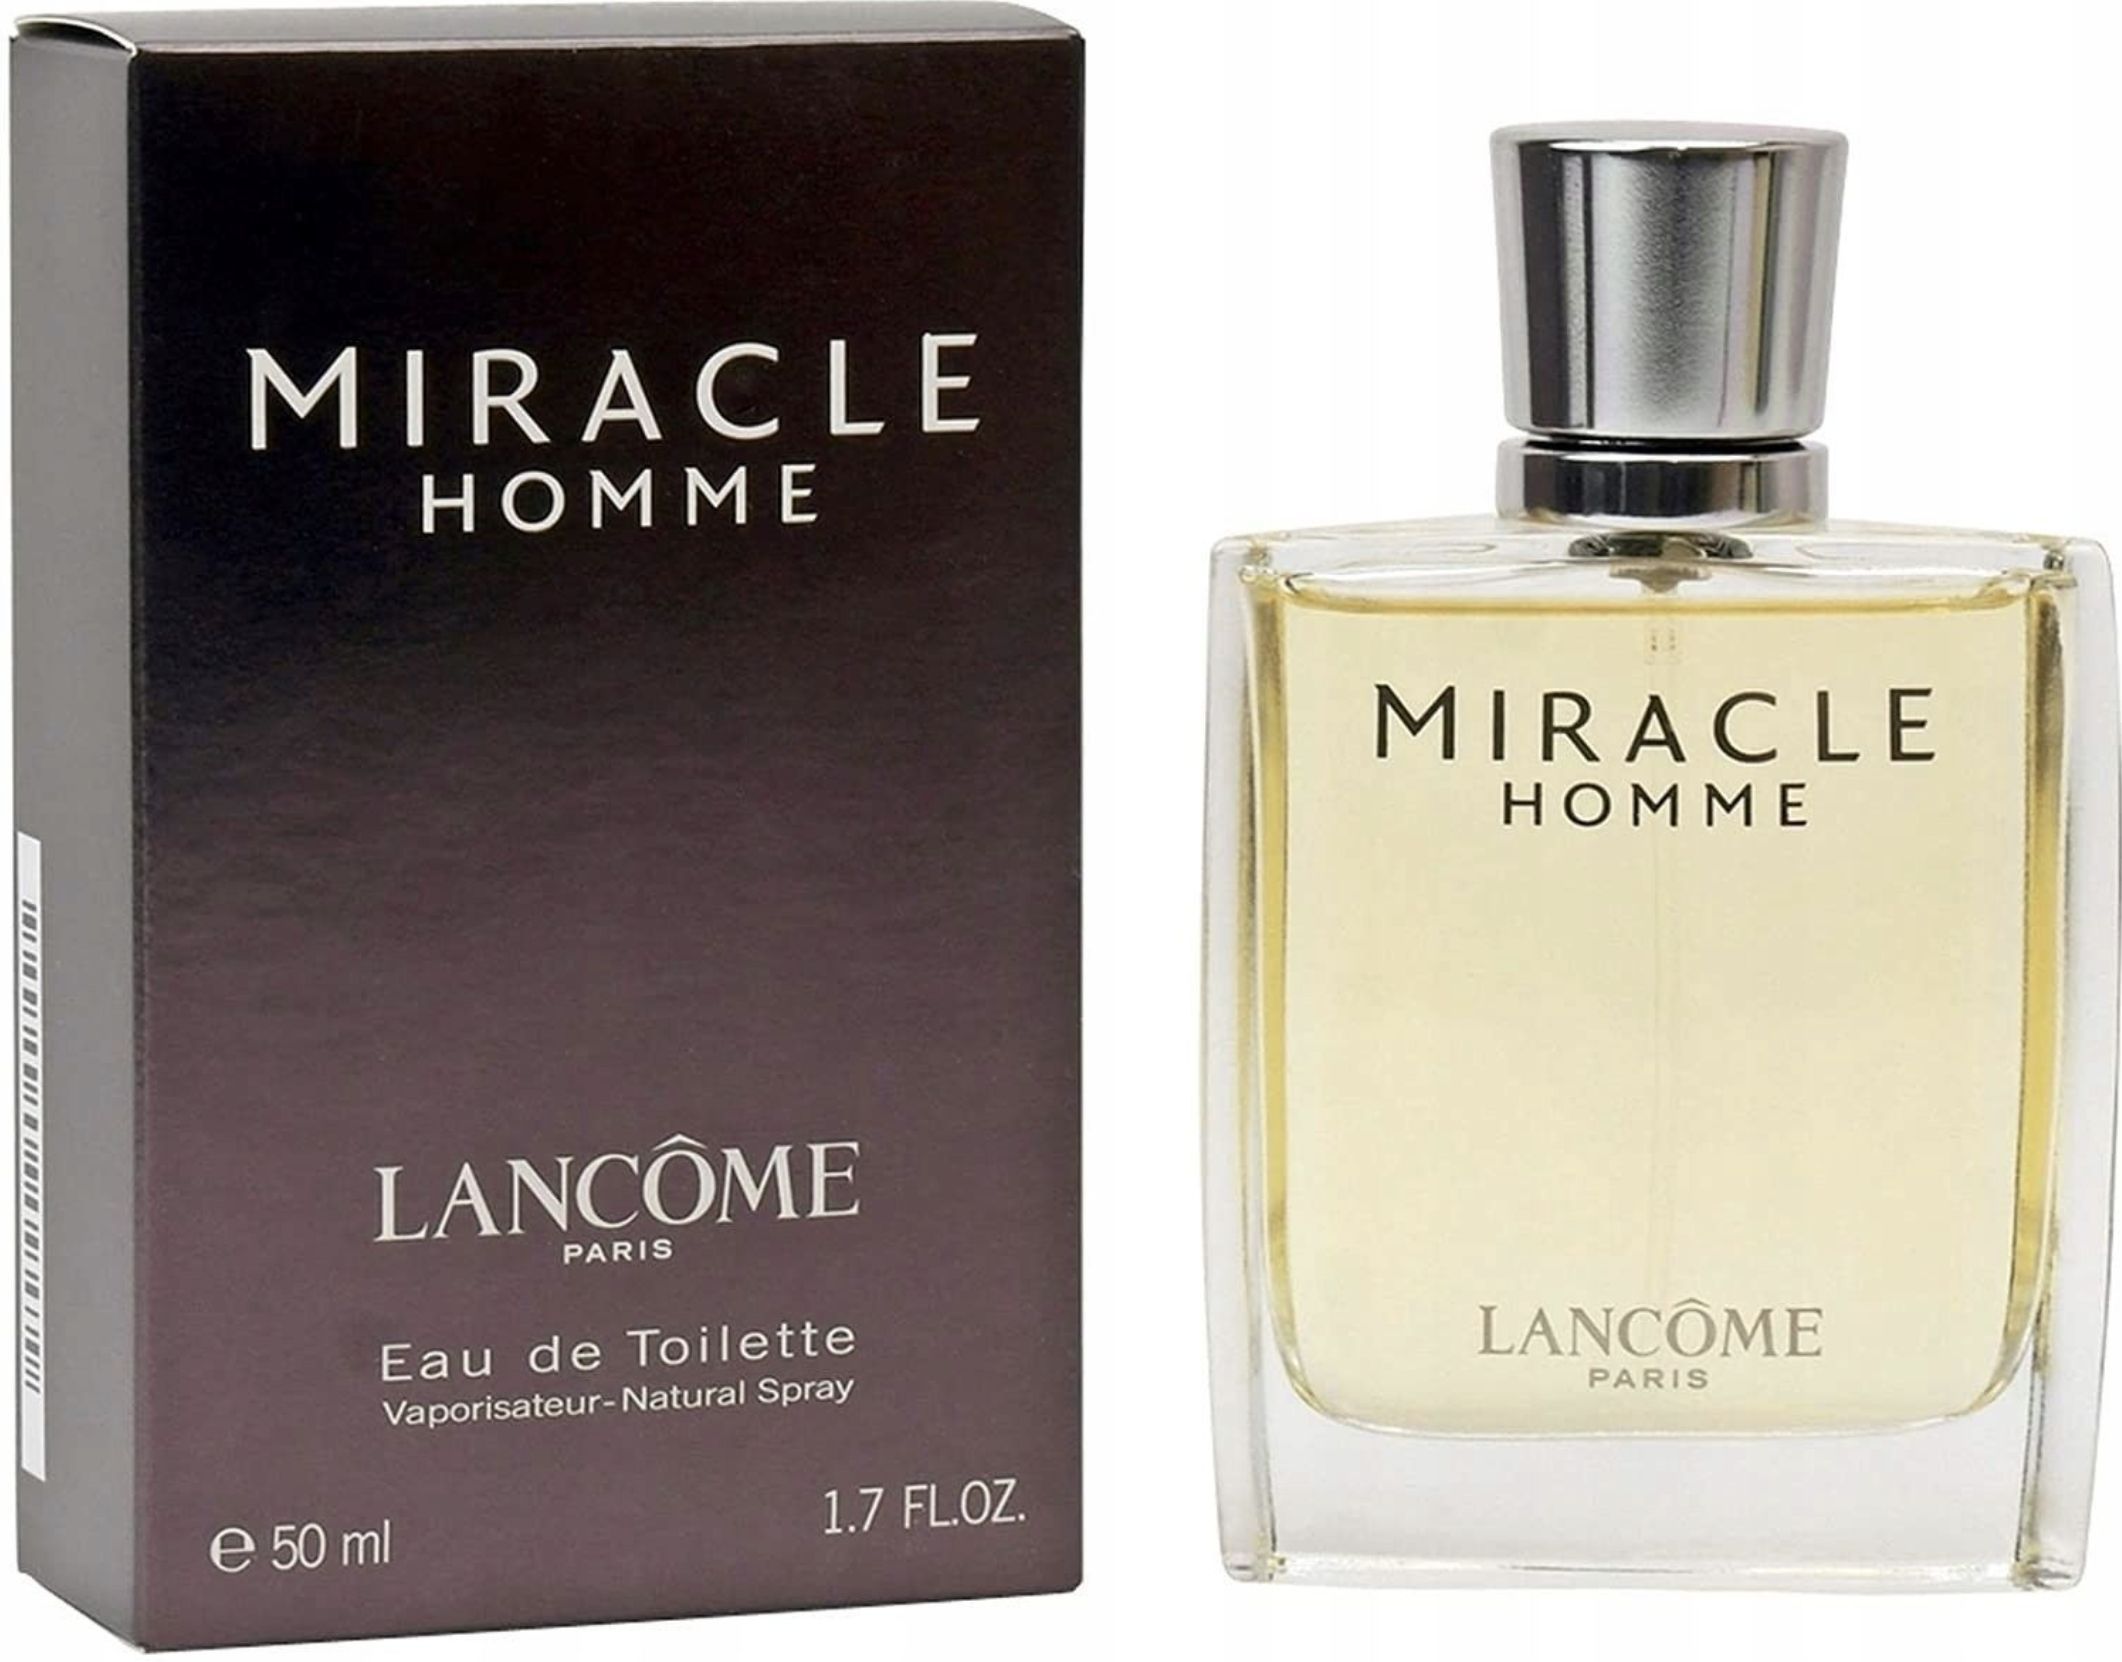 Lancome homme